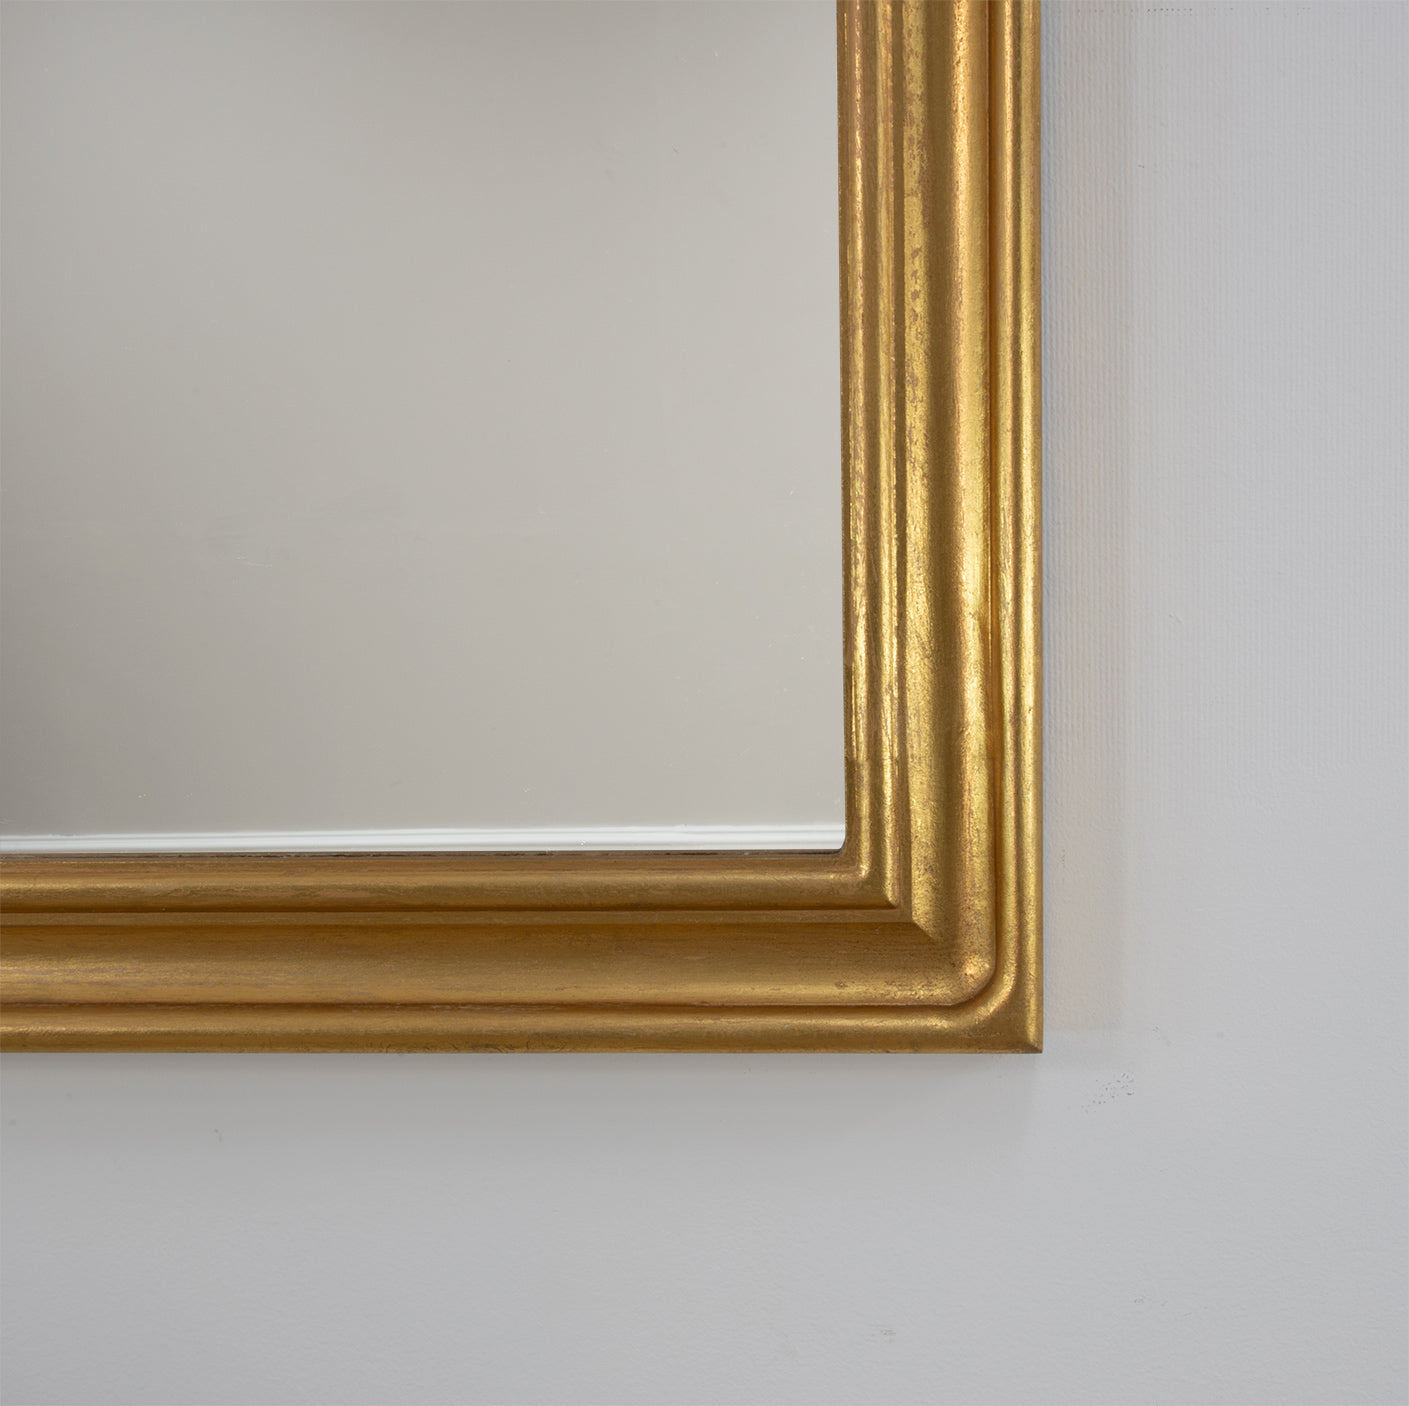 Tallulah Silver and Gold Louis Philippe Mirror